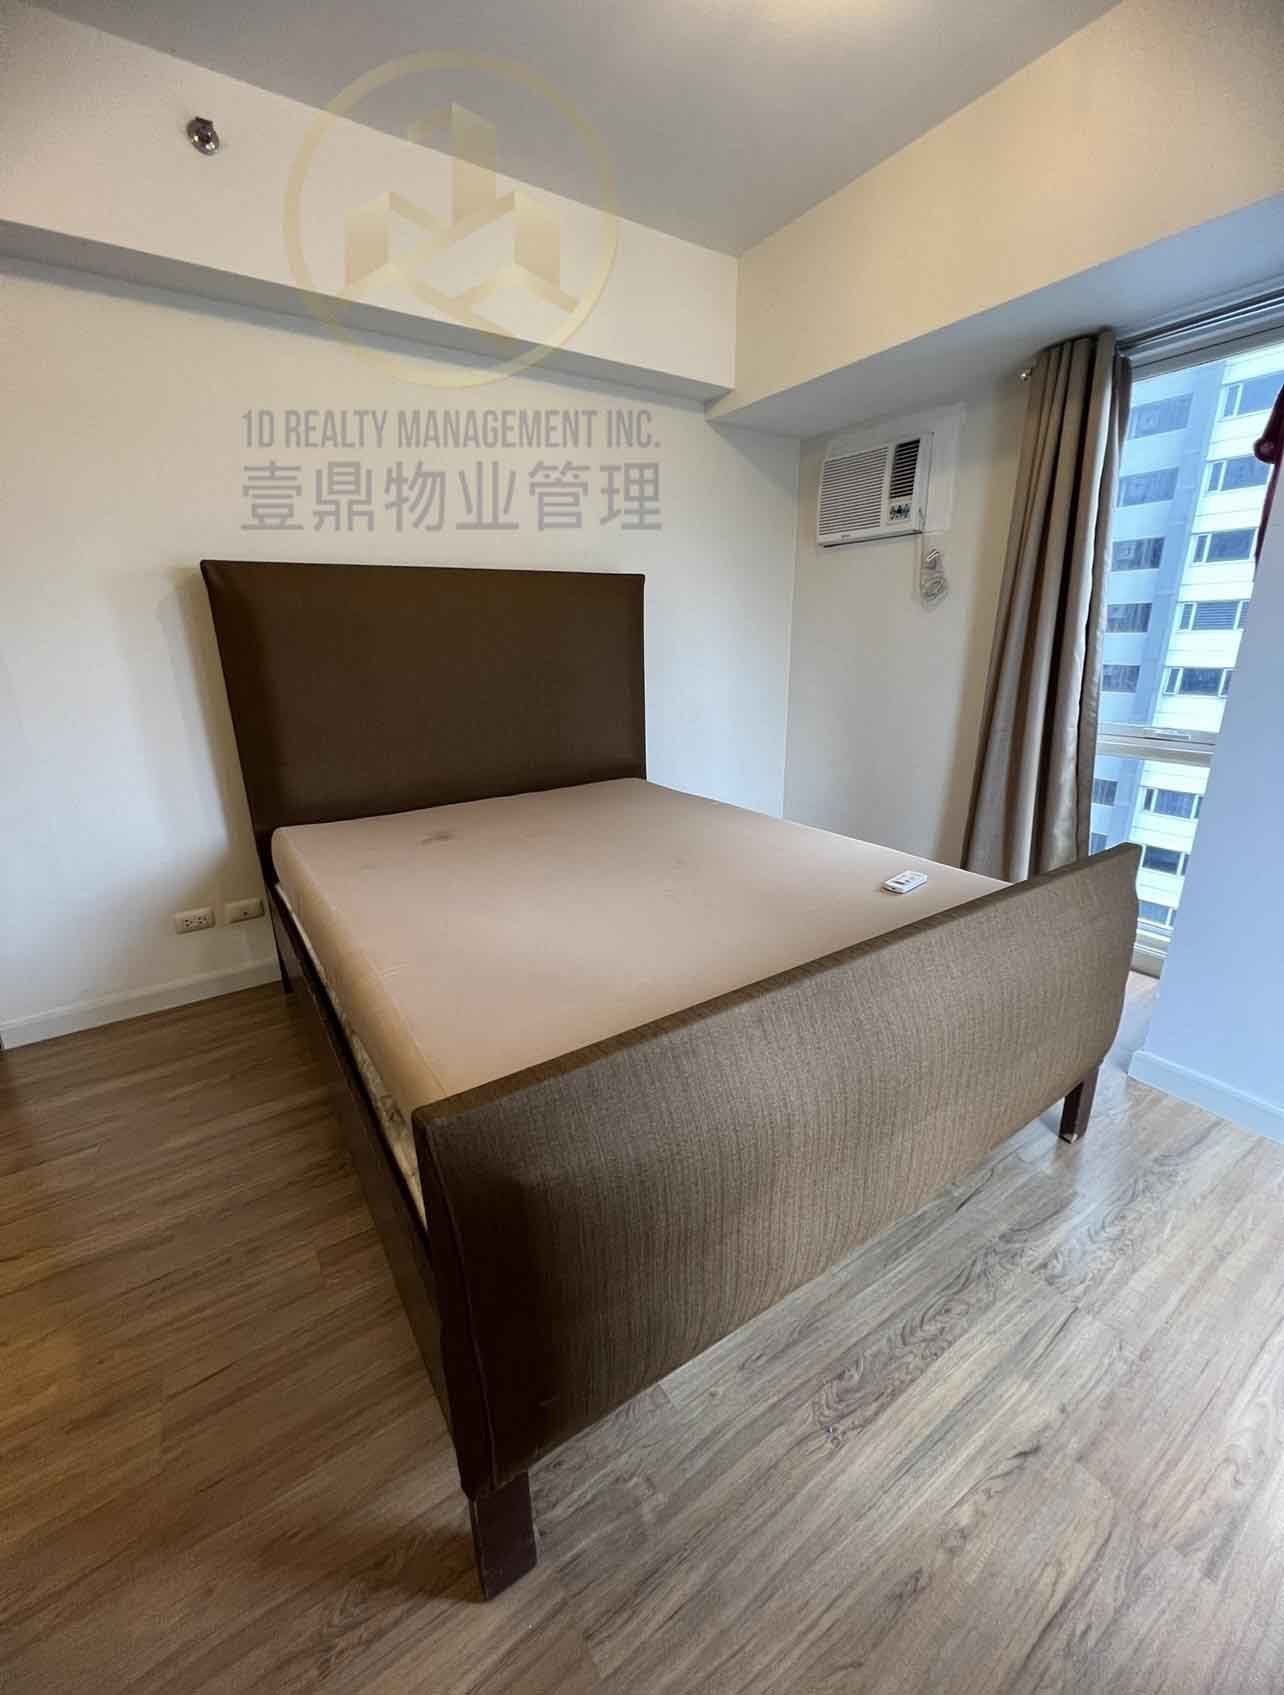 The Lerato - Malugay St. Makati City - FOR LEASE 2BR